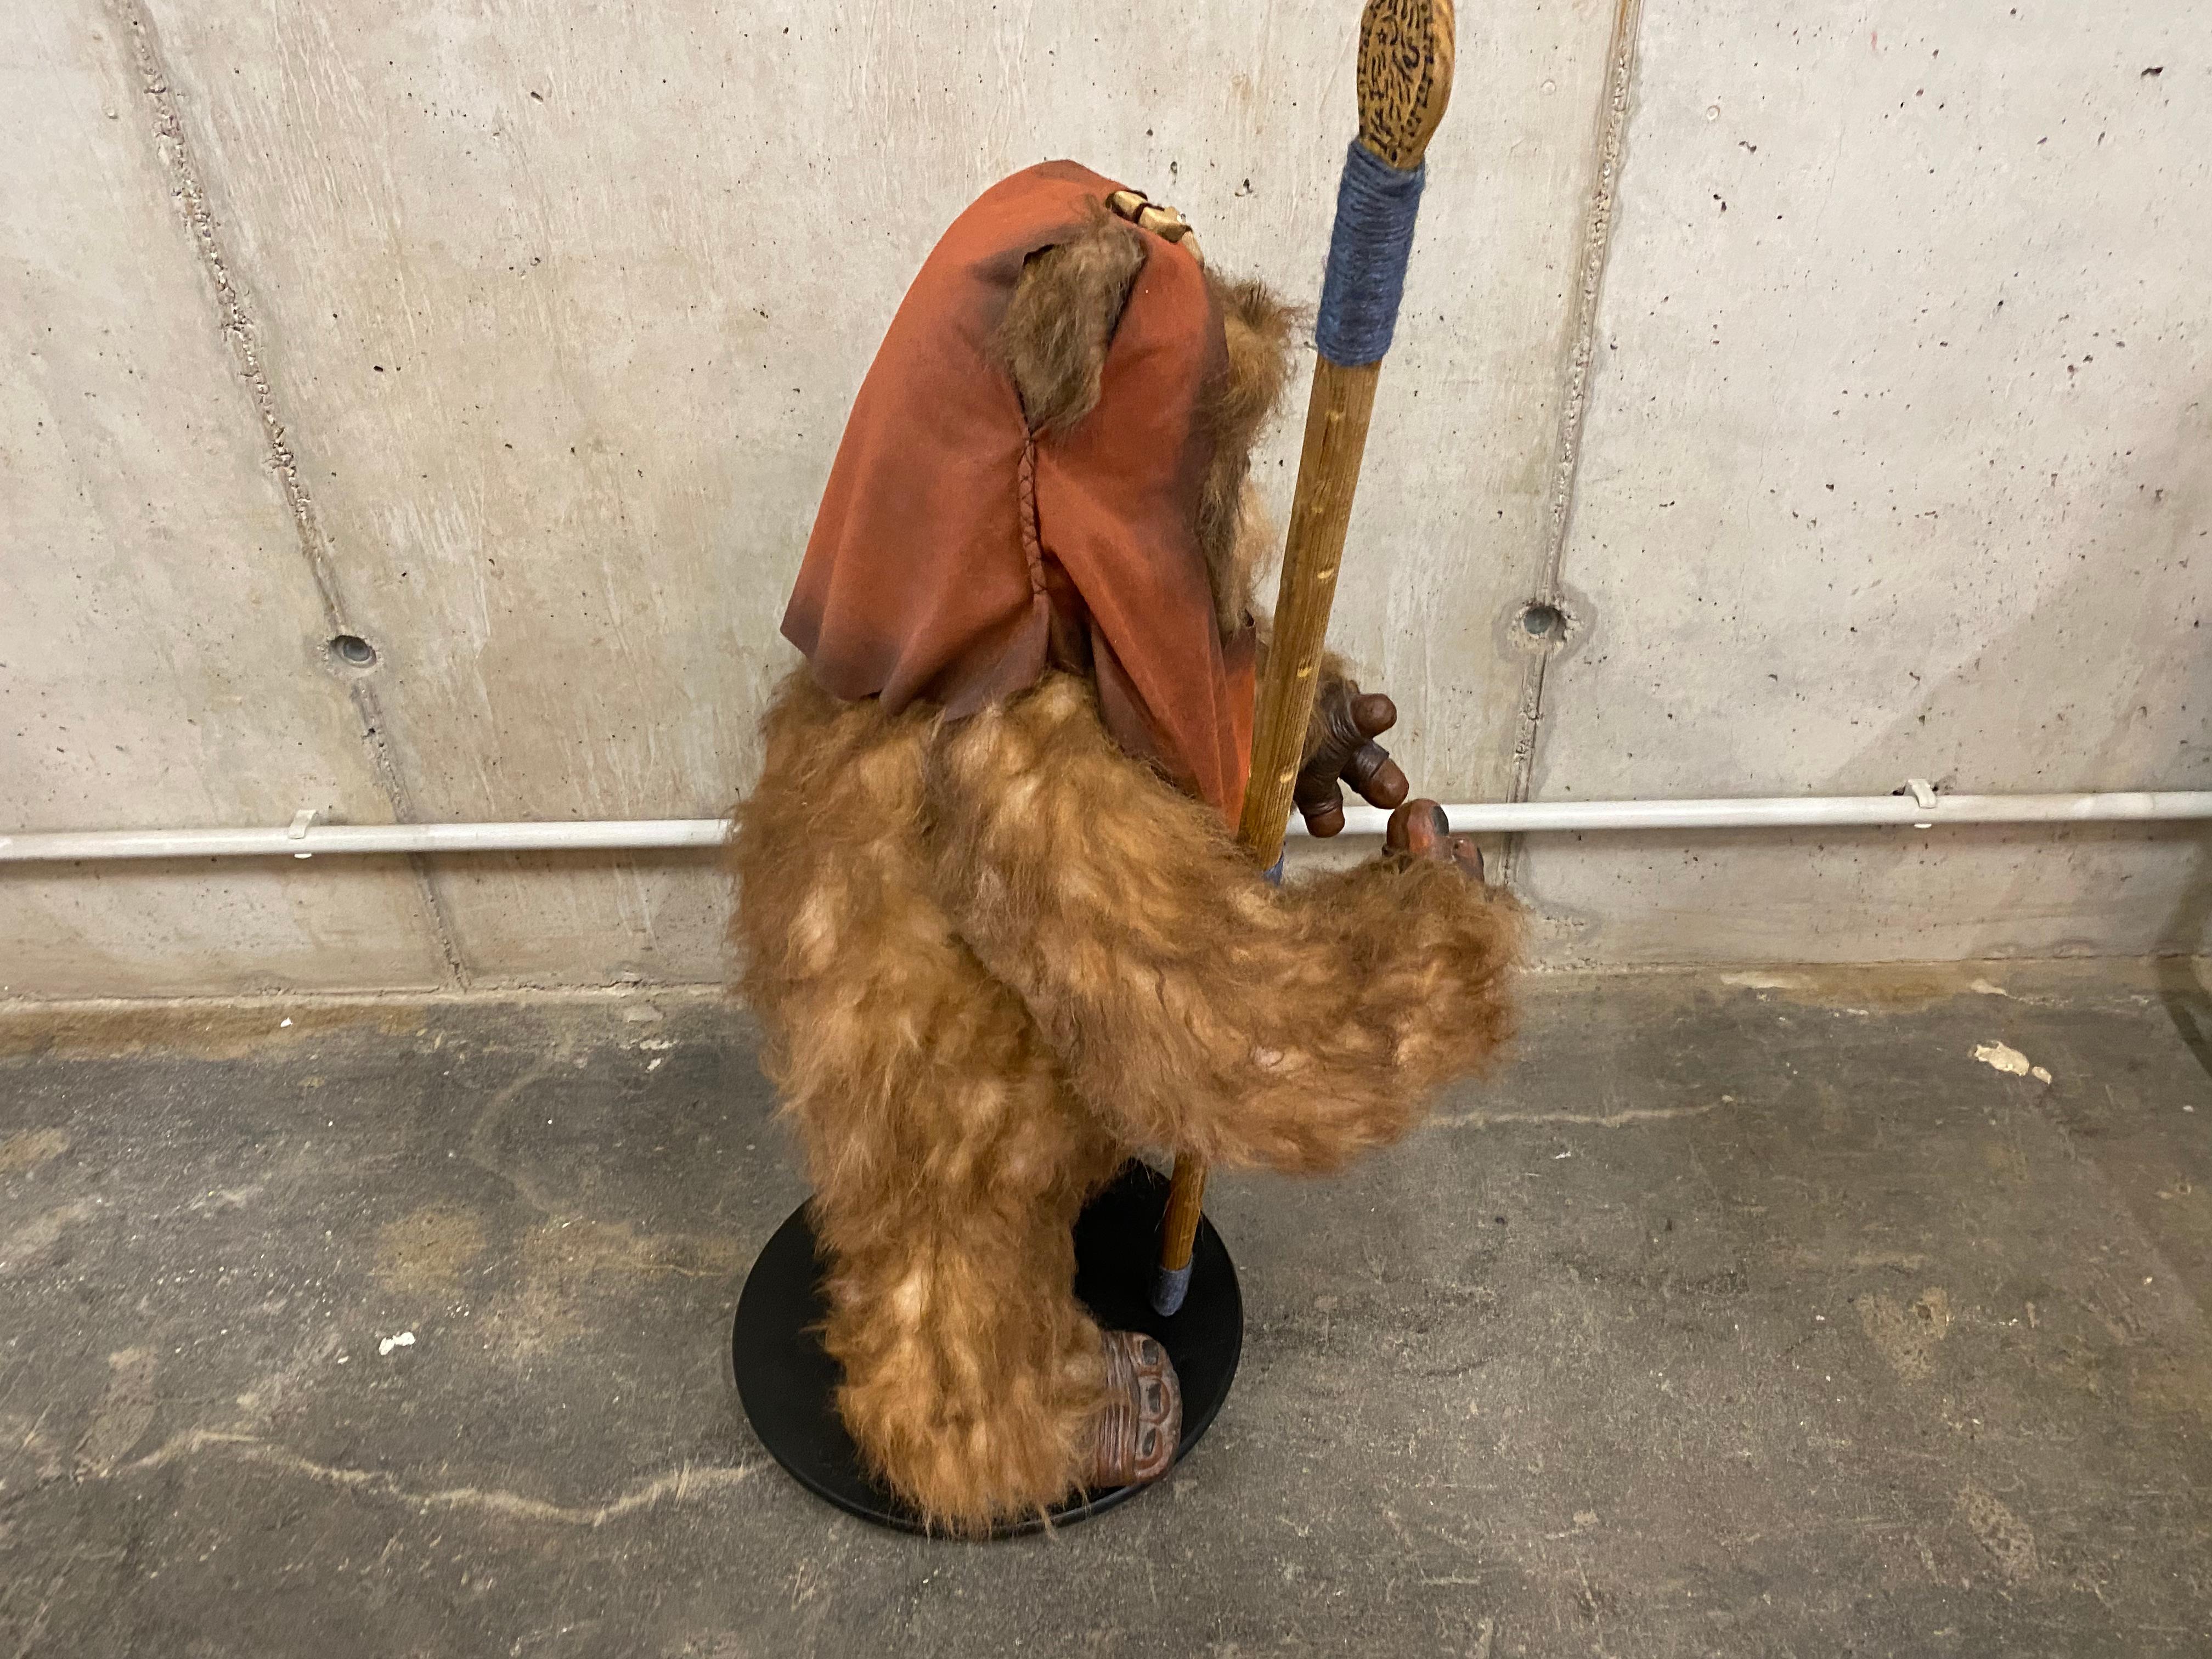 Life Size Wicket Ewok Figure, Edition of 50 Pieces, Star Wars Photo Requisite 4